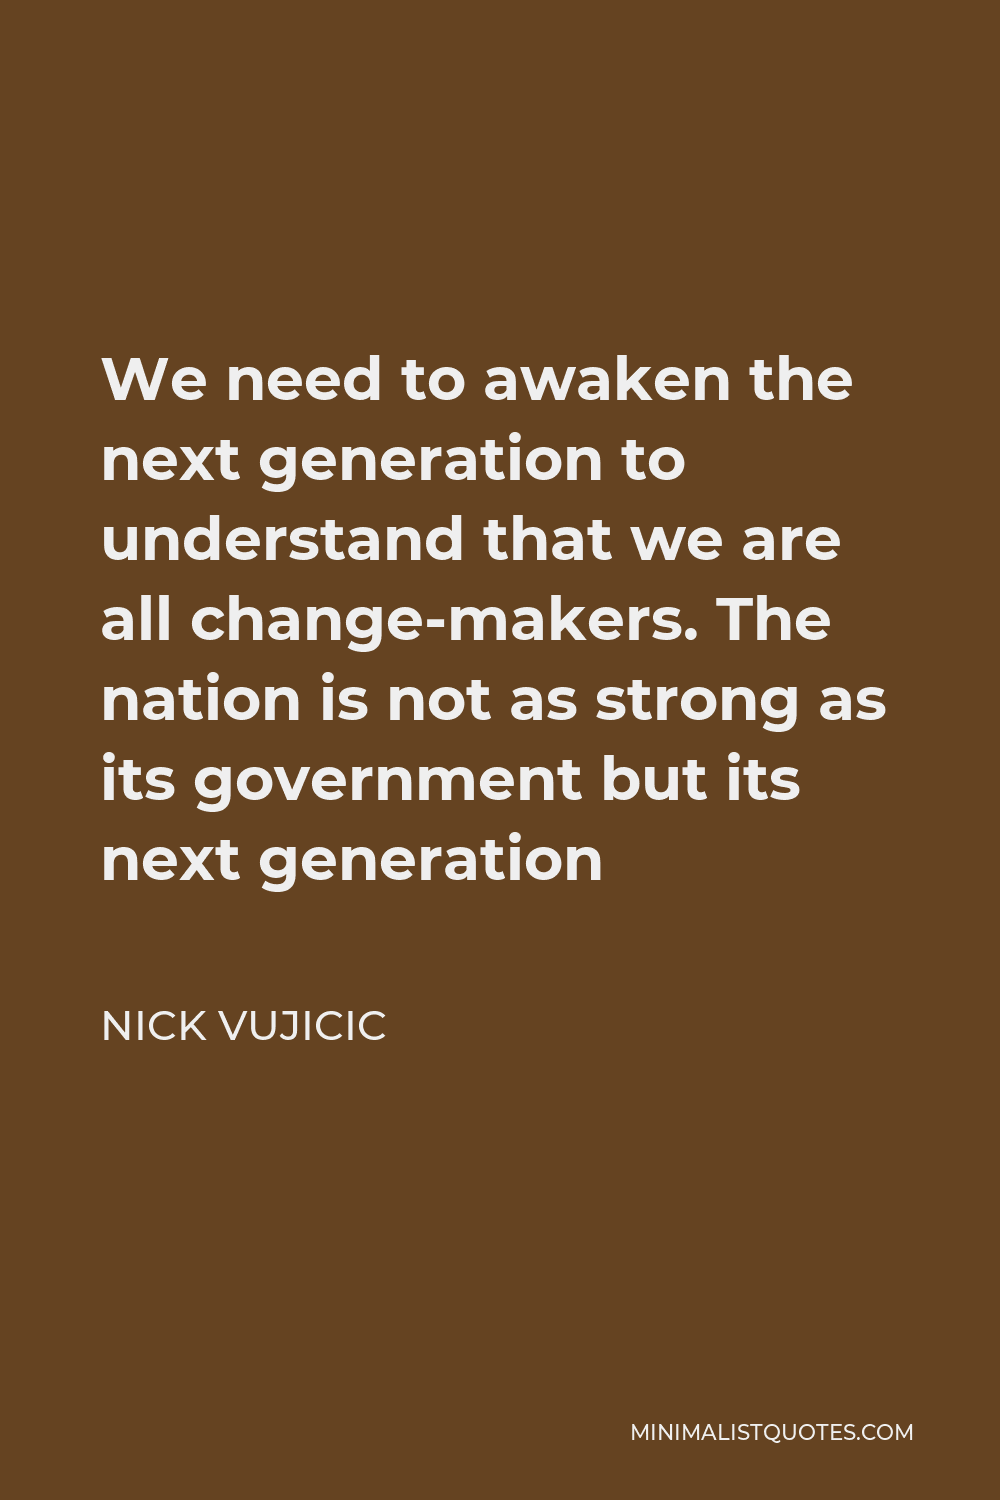 Nick Vujicic Quote - We need to awaken the next generation to understand that we are all change-makers. The nation is not as strong as its government but its next generation